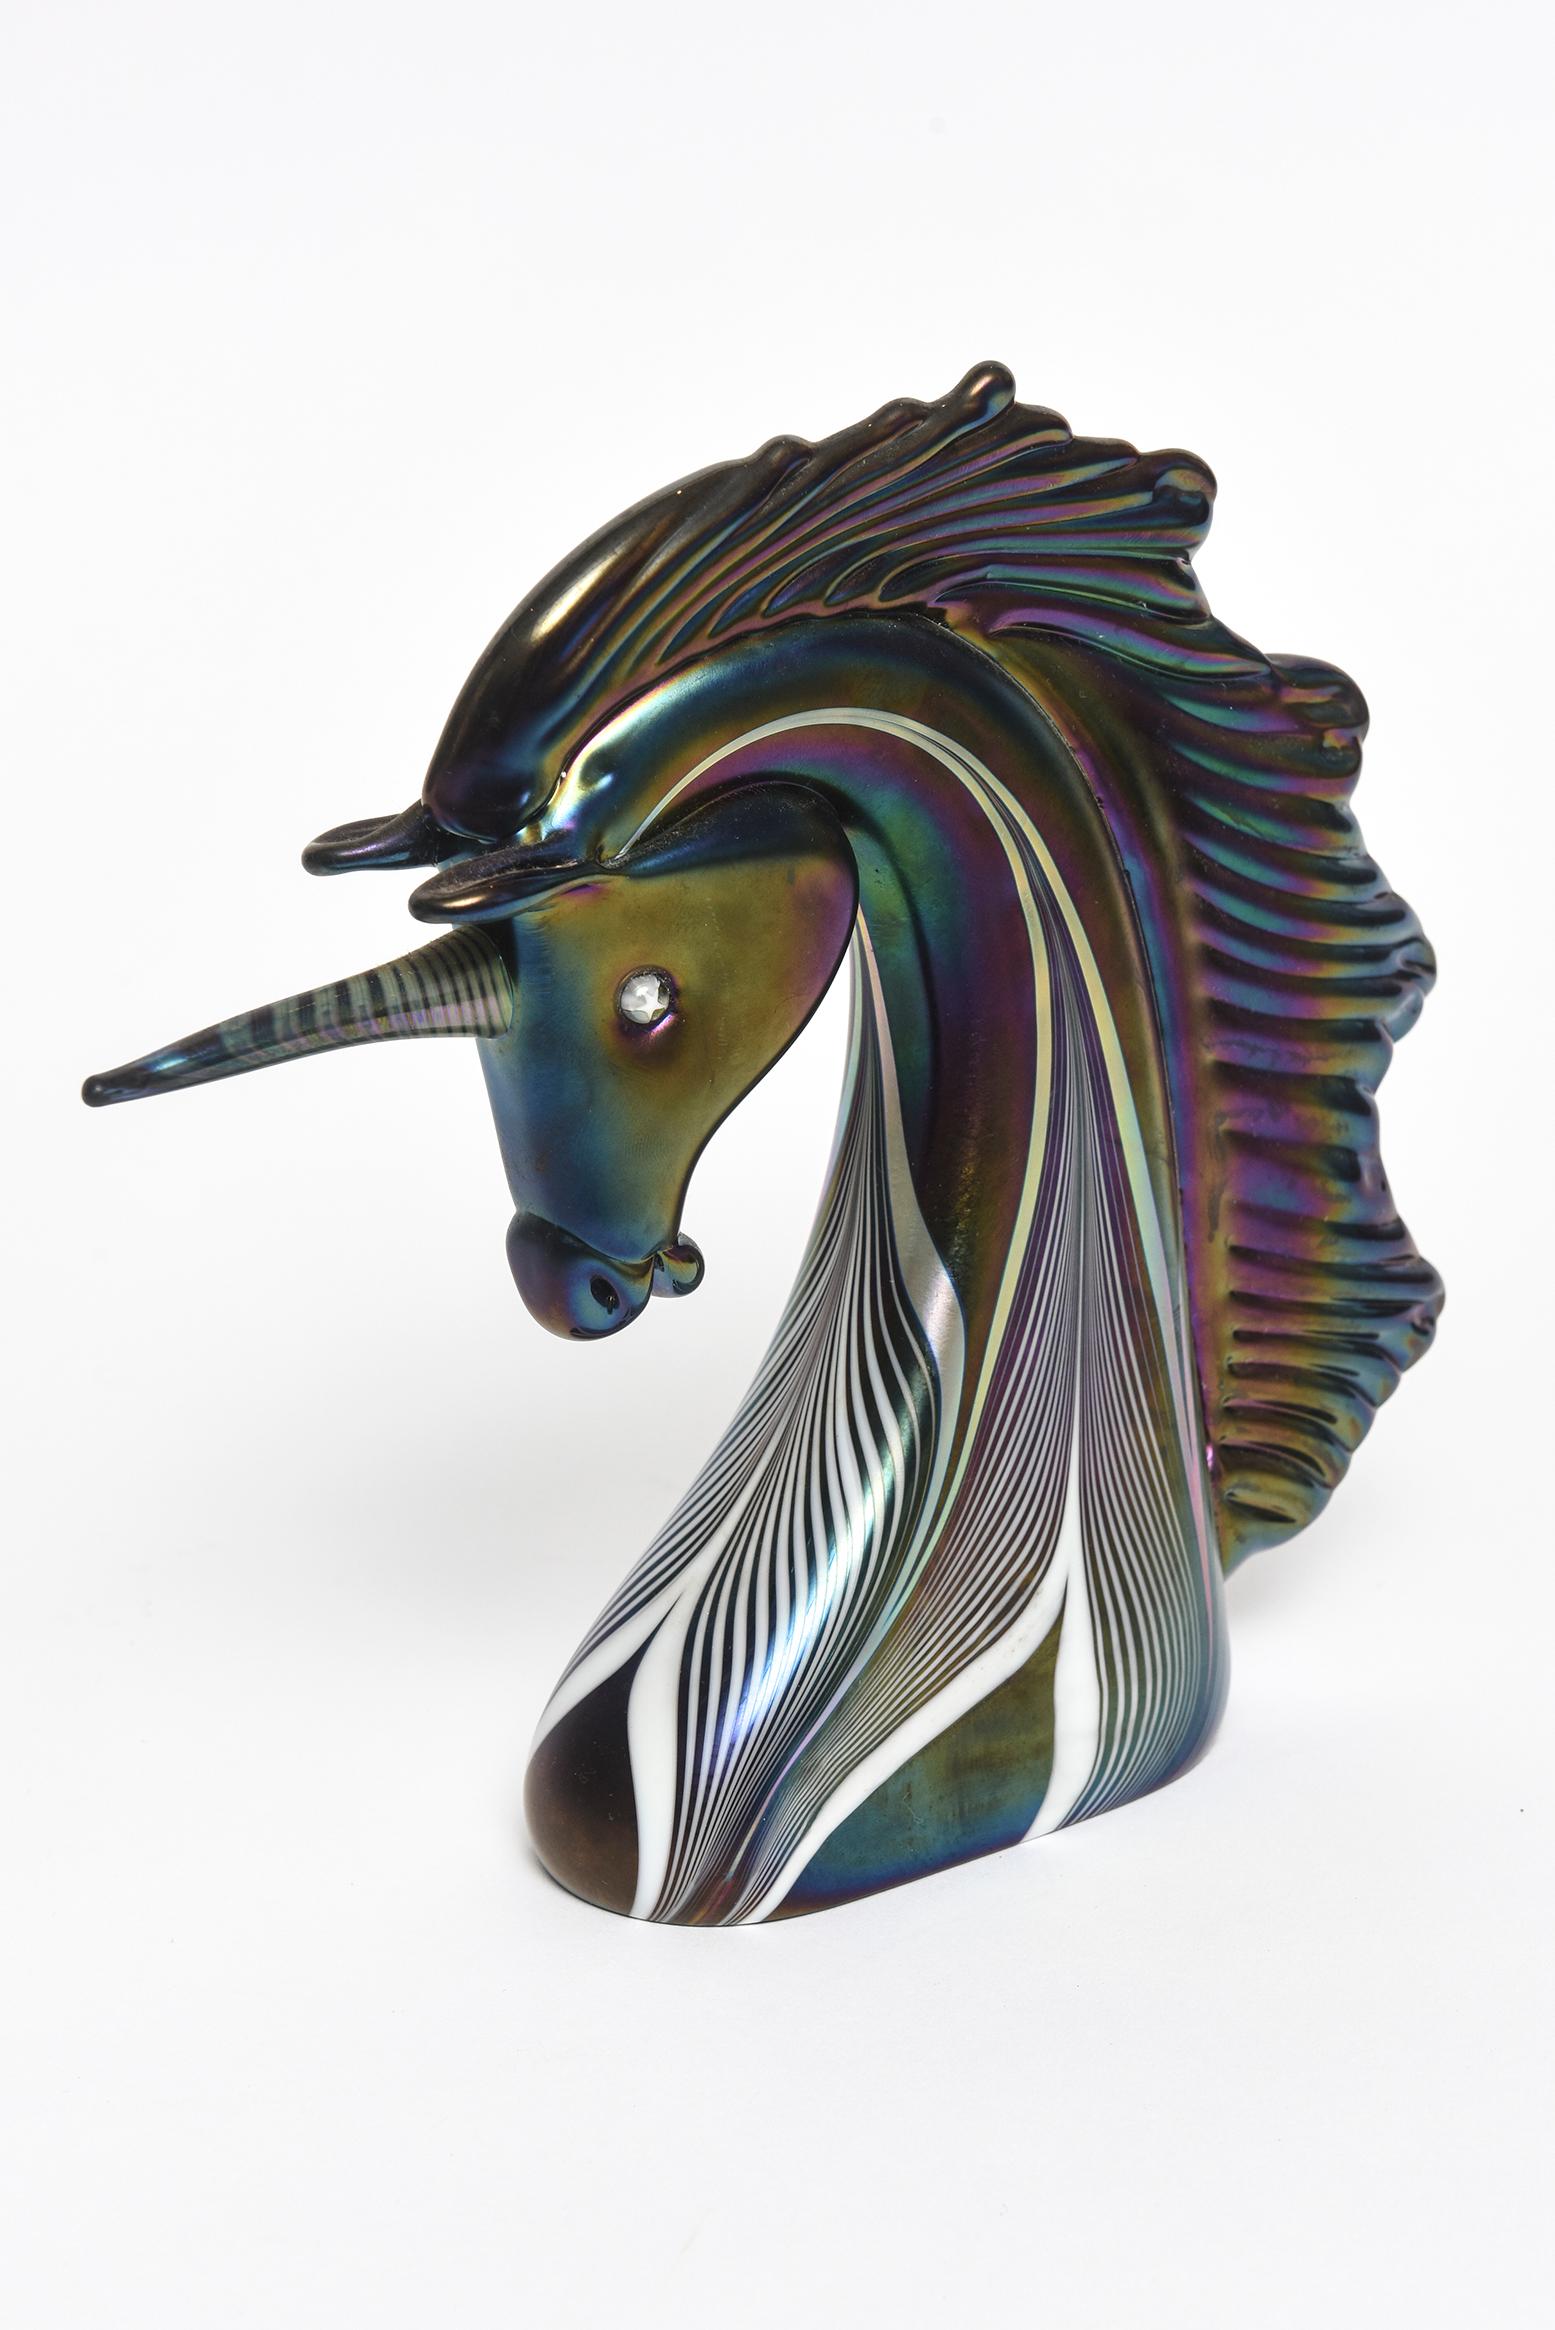 Beautiful art glass unicorn bust by Stuart Abelman featuring a pulled feather iridescent design. Signed on the bottom. Date 1985 Number 859

Artist Bio from his site:
Stuart Abelman’s artistic ability was recognized at an early age, giving him